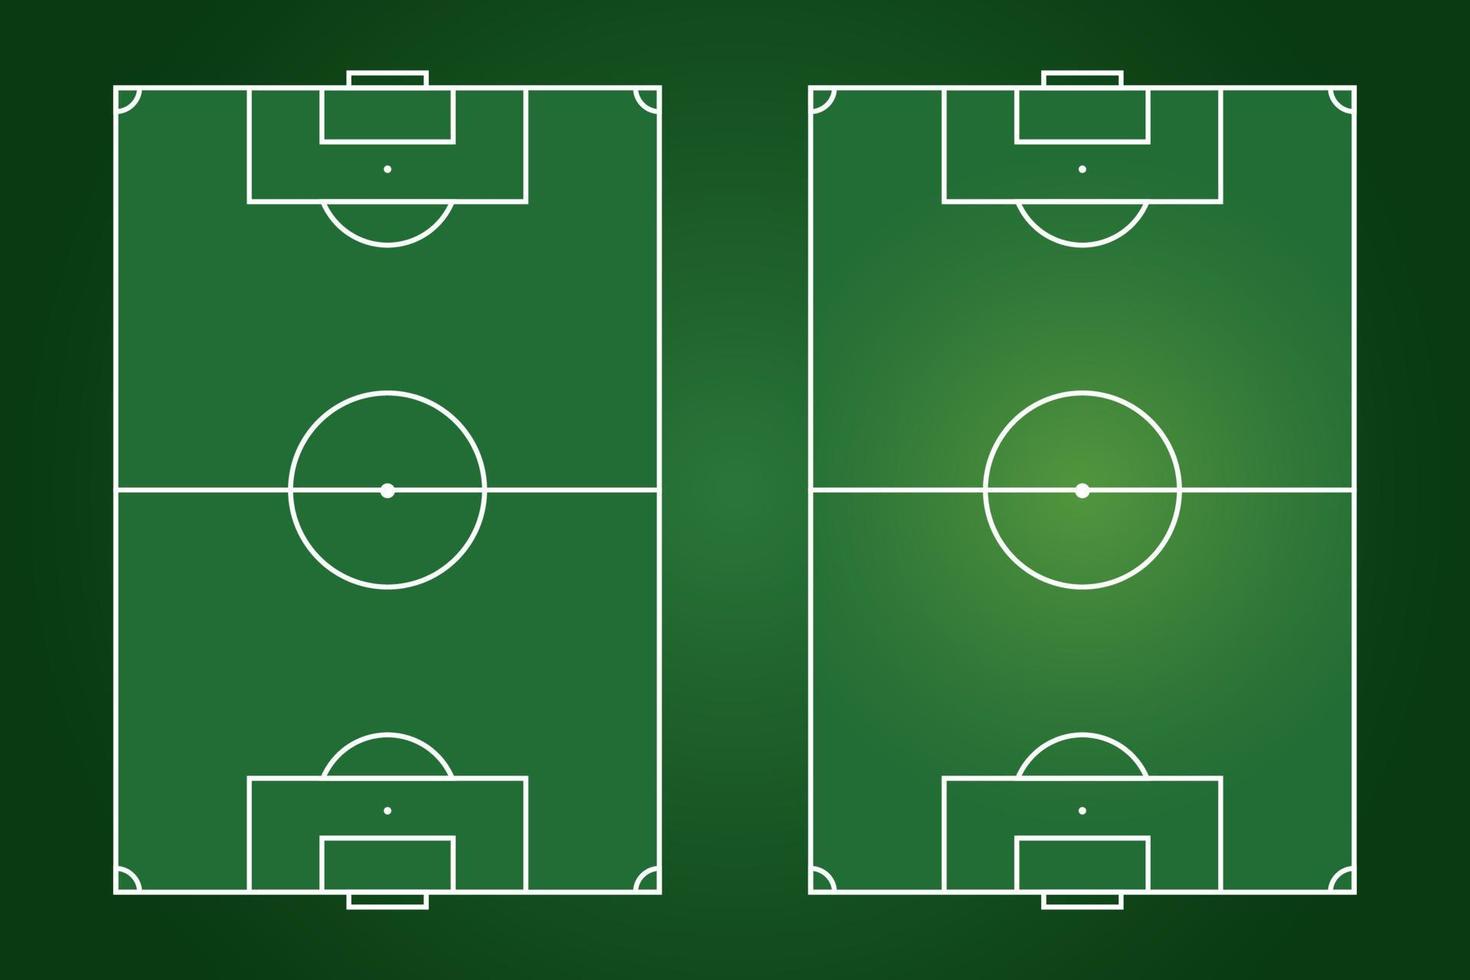 Football field flat design, Soccer field graphic illustration, Vector of football court and layout.